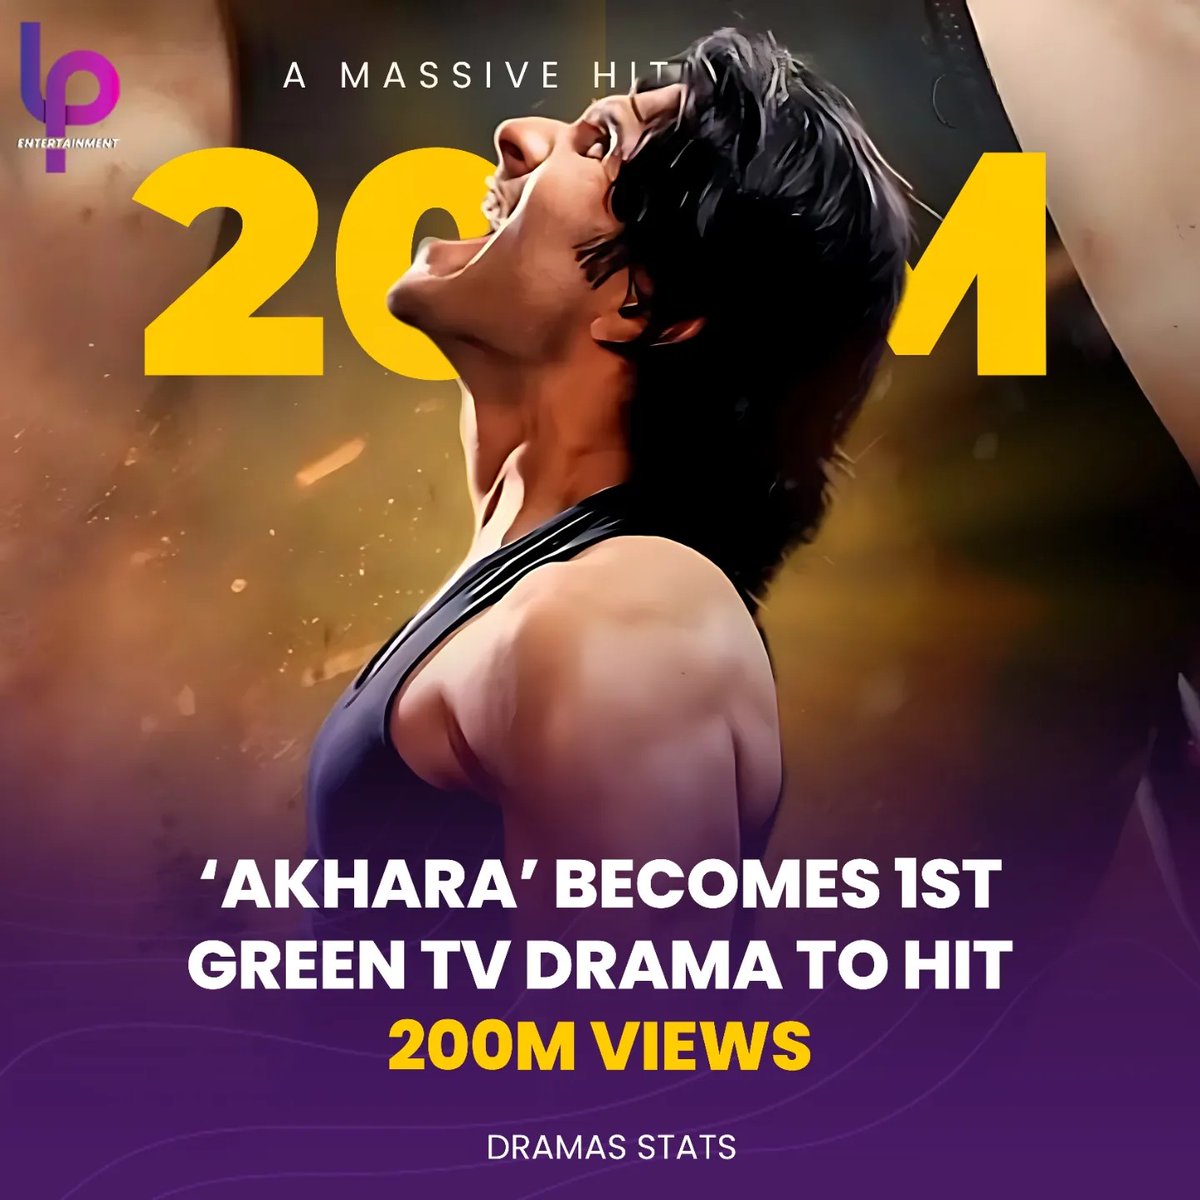 Akhara has surpassed another achievement. 🔥🔥
Becomes 1st Drama of Green Entertainment TV to hit 200M Views on YouTube, that too before completing its air time.
It's a massive hit. 👏
#AkharaDrama #GreenEntertainment #FerozeKhan #SonyaHussyn #LPEntertainment #ShamoonAbbasi